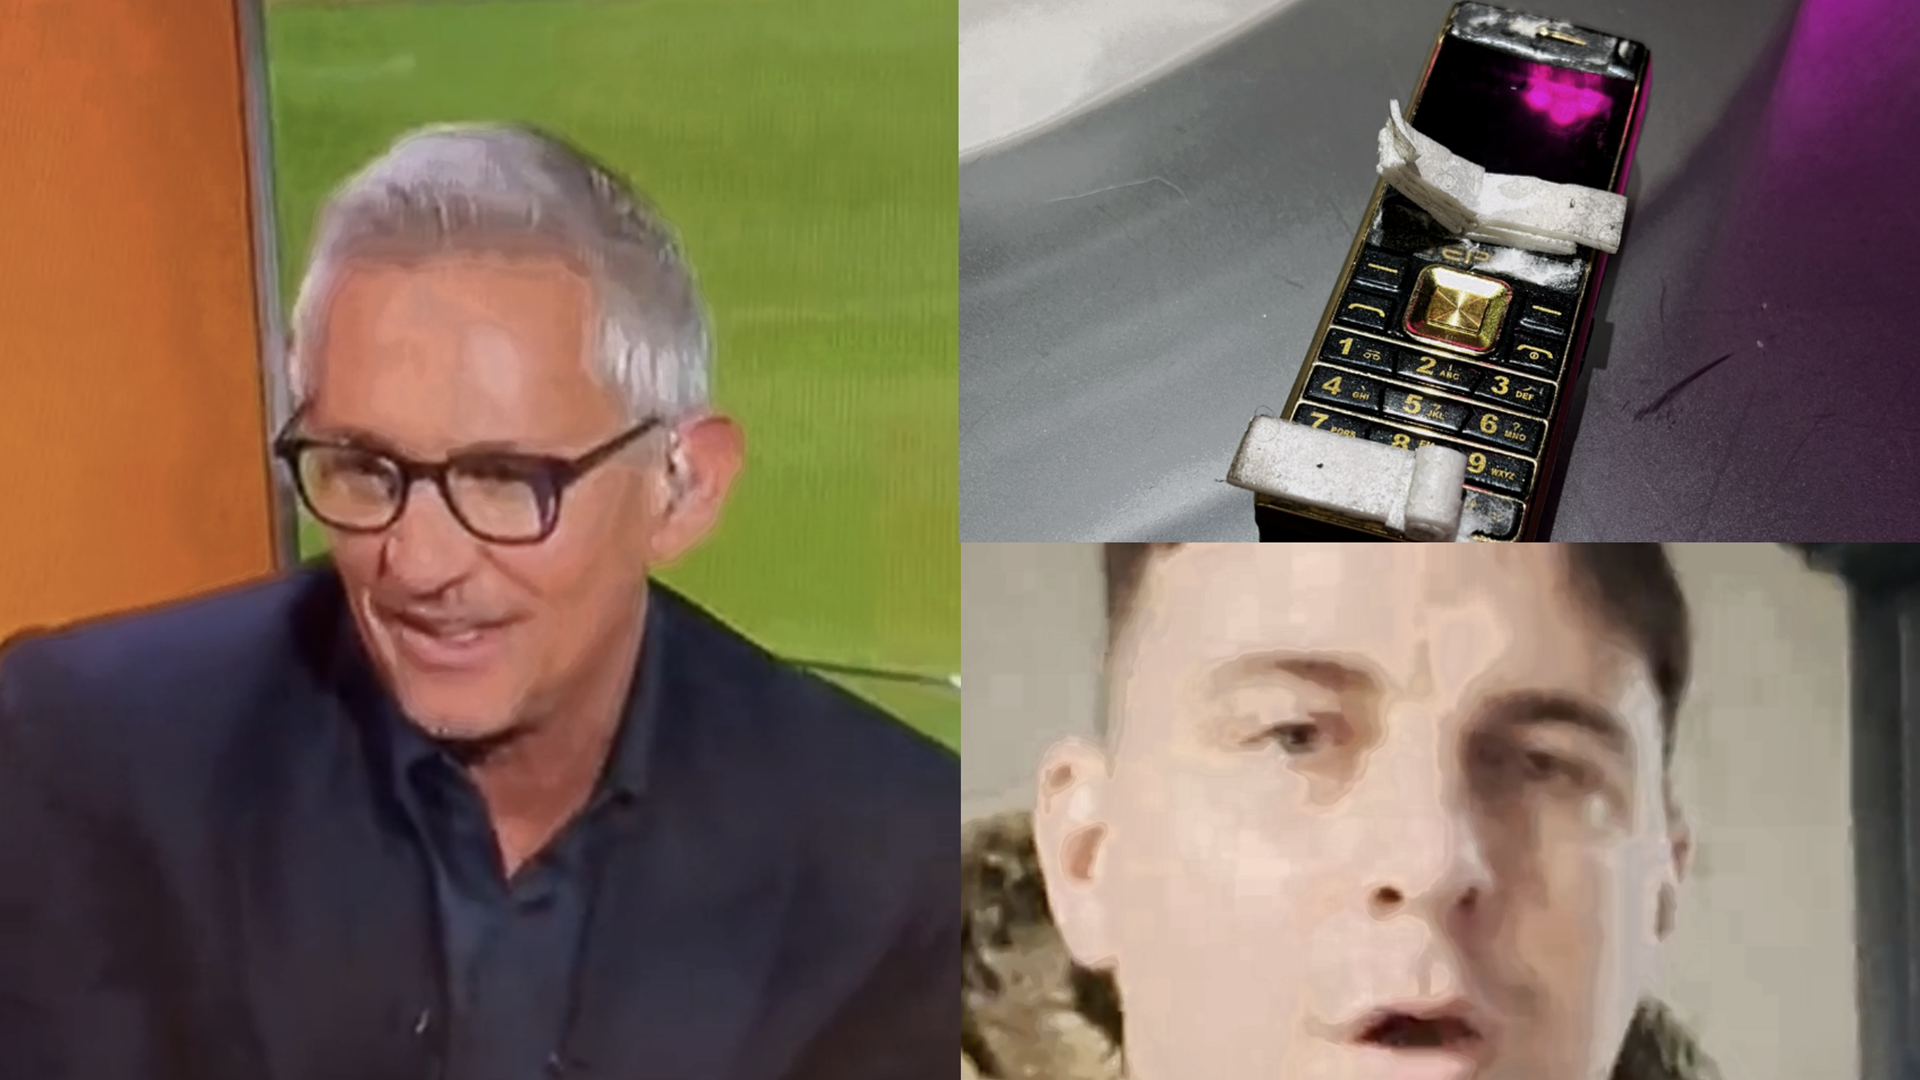 BBC sex-noise culprit revealed! Notorious prankster claims responsibility for broadcasting porn audio on live TV before Liverpool FA Cup match Goal UK photo